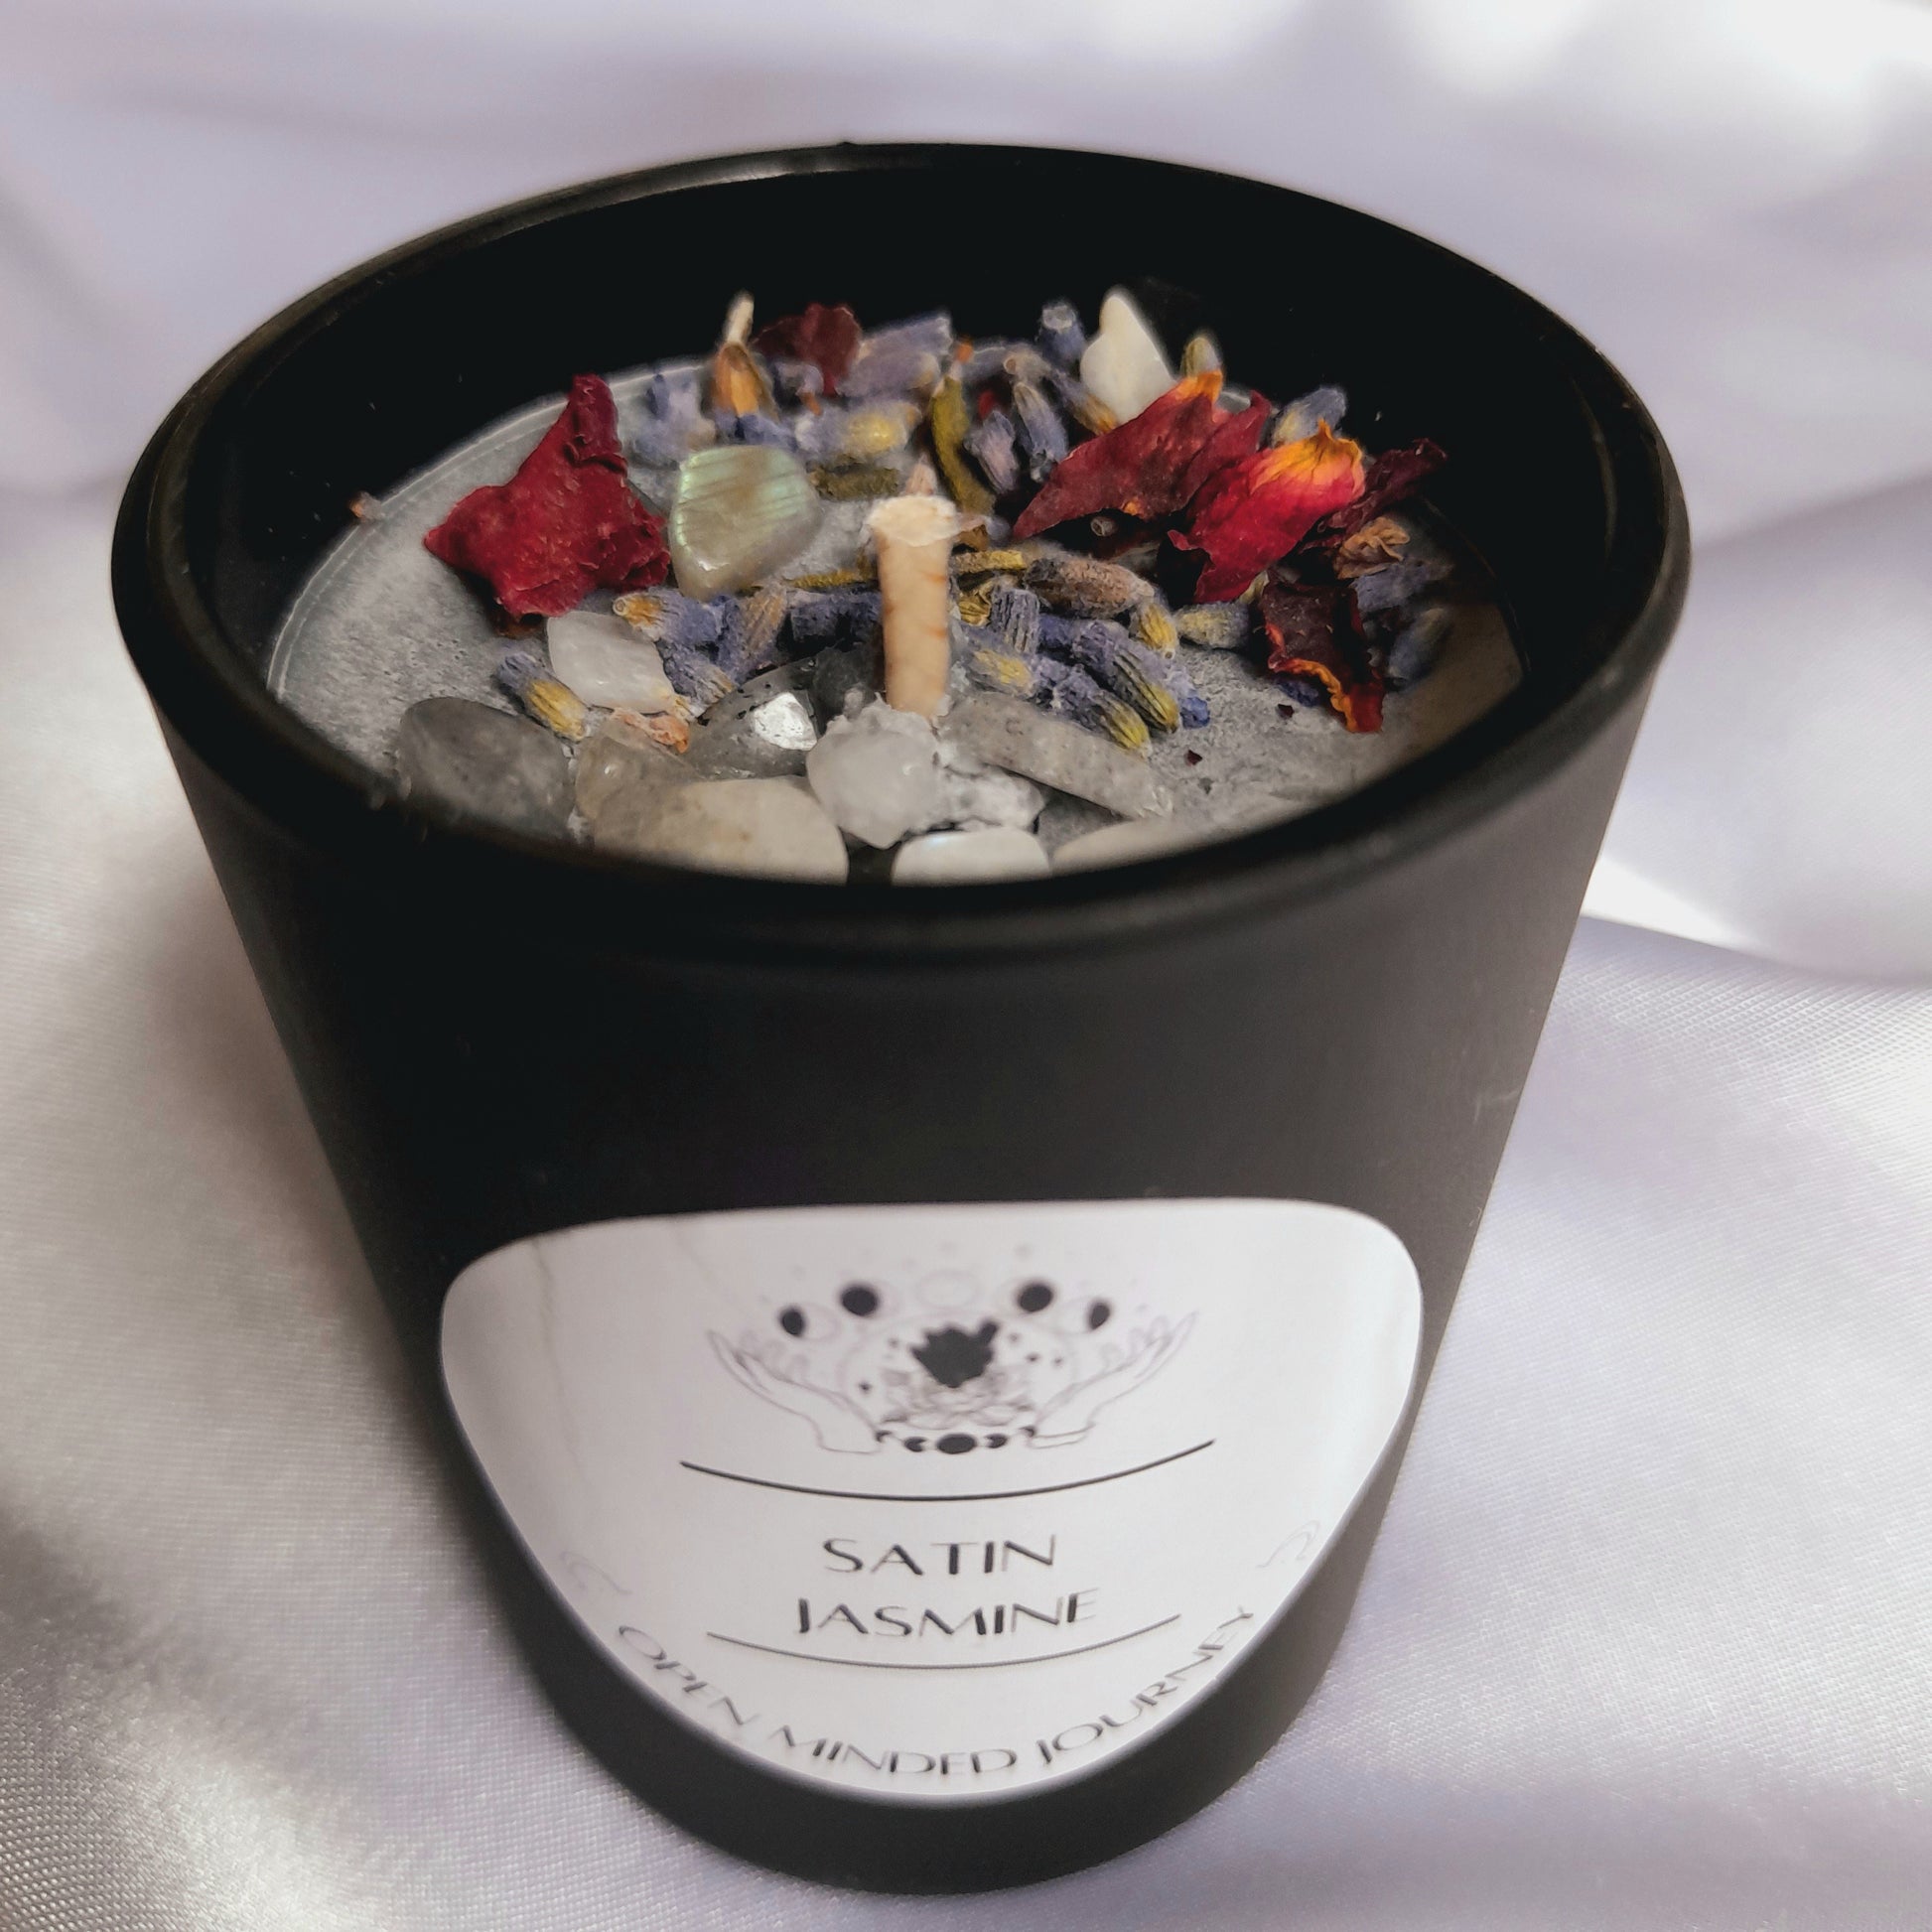 Handmade Crystal Candles: Experience luxury with these soy wax candles adorned with Labradorite Chips, Moonstone Chips, Rose petals, and Lavender petals. Each candle stands roughly 6.5cms, creating a harmonious fusion of aesthetic charm and soothing energies.